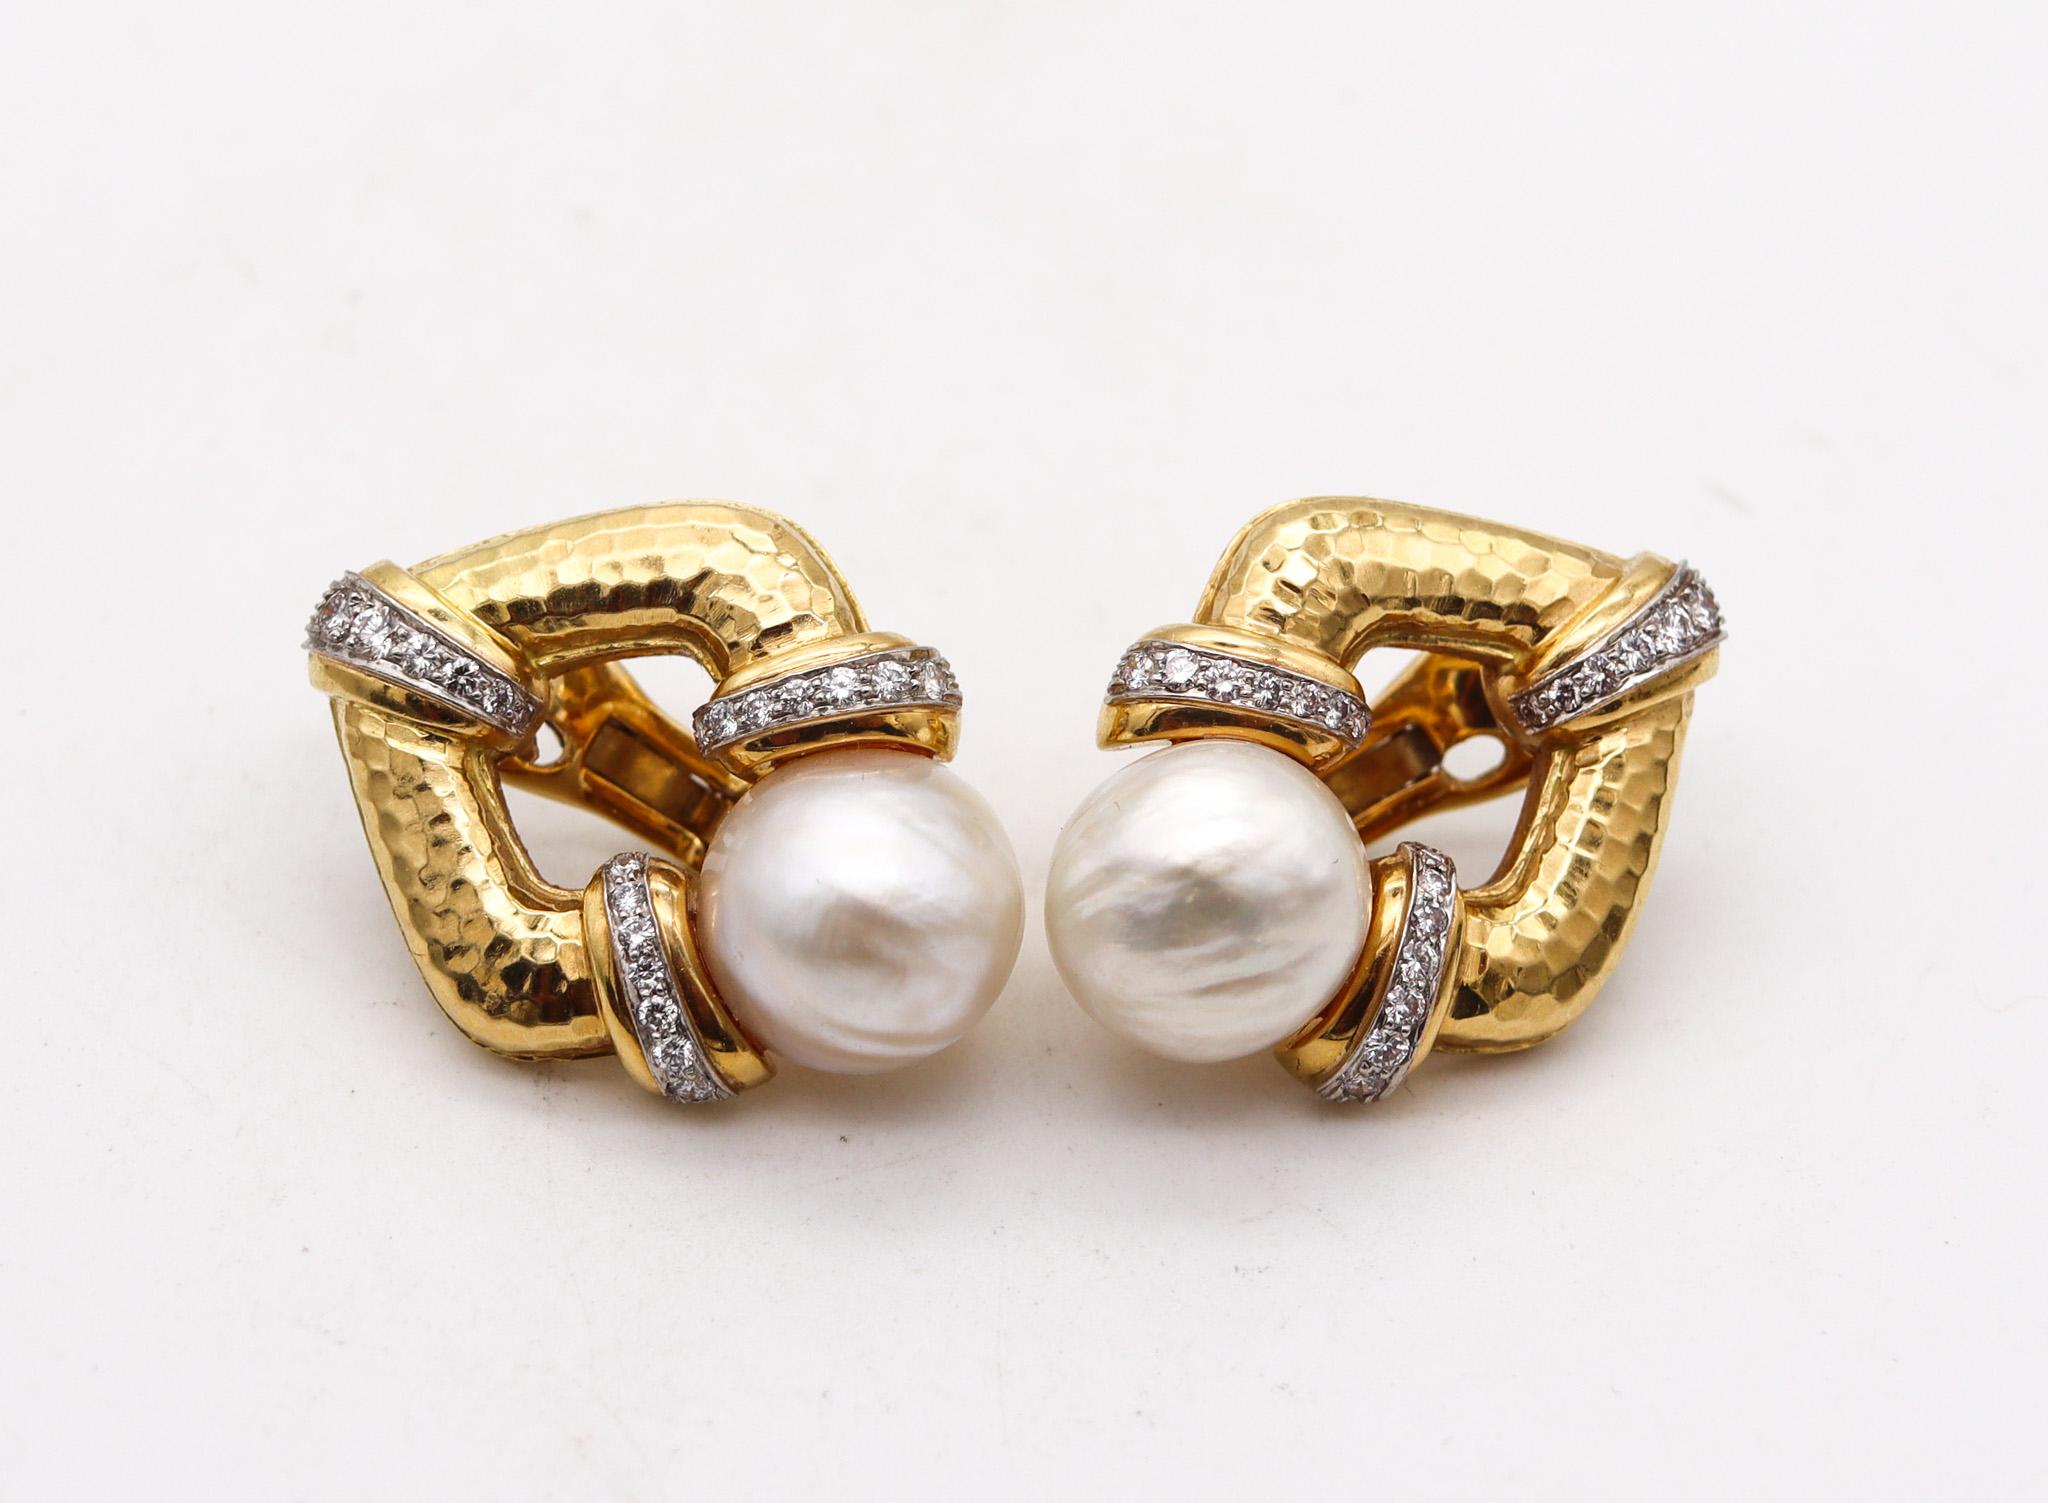 Modernist Andrew Clunn Pearls Earrings In 18Kt Yellow Gold With 1.20 Ctw In Diamonds For Sale